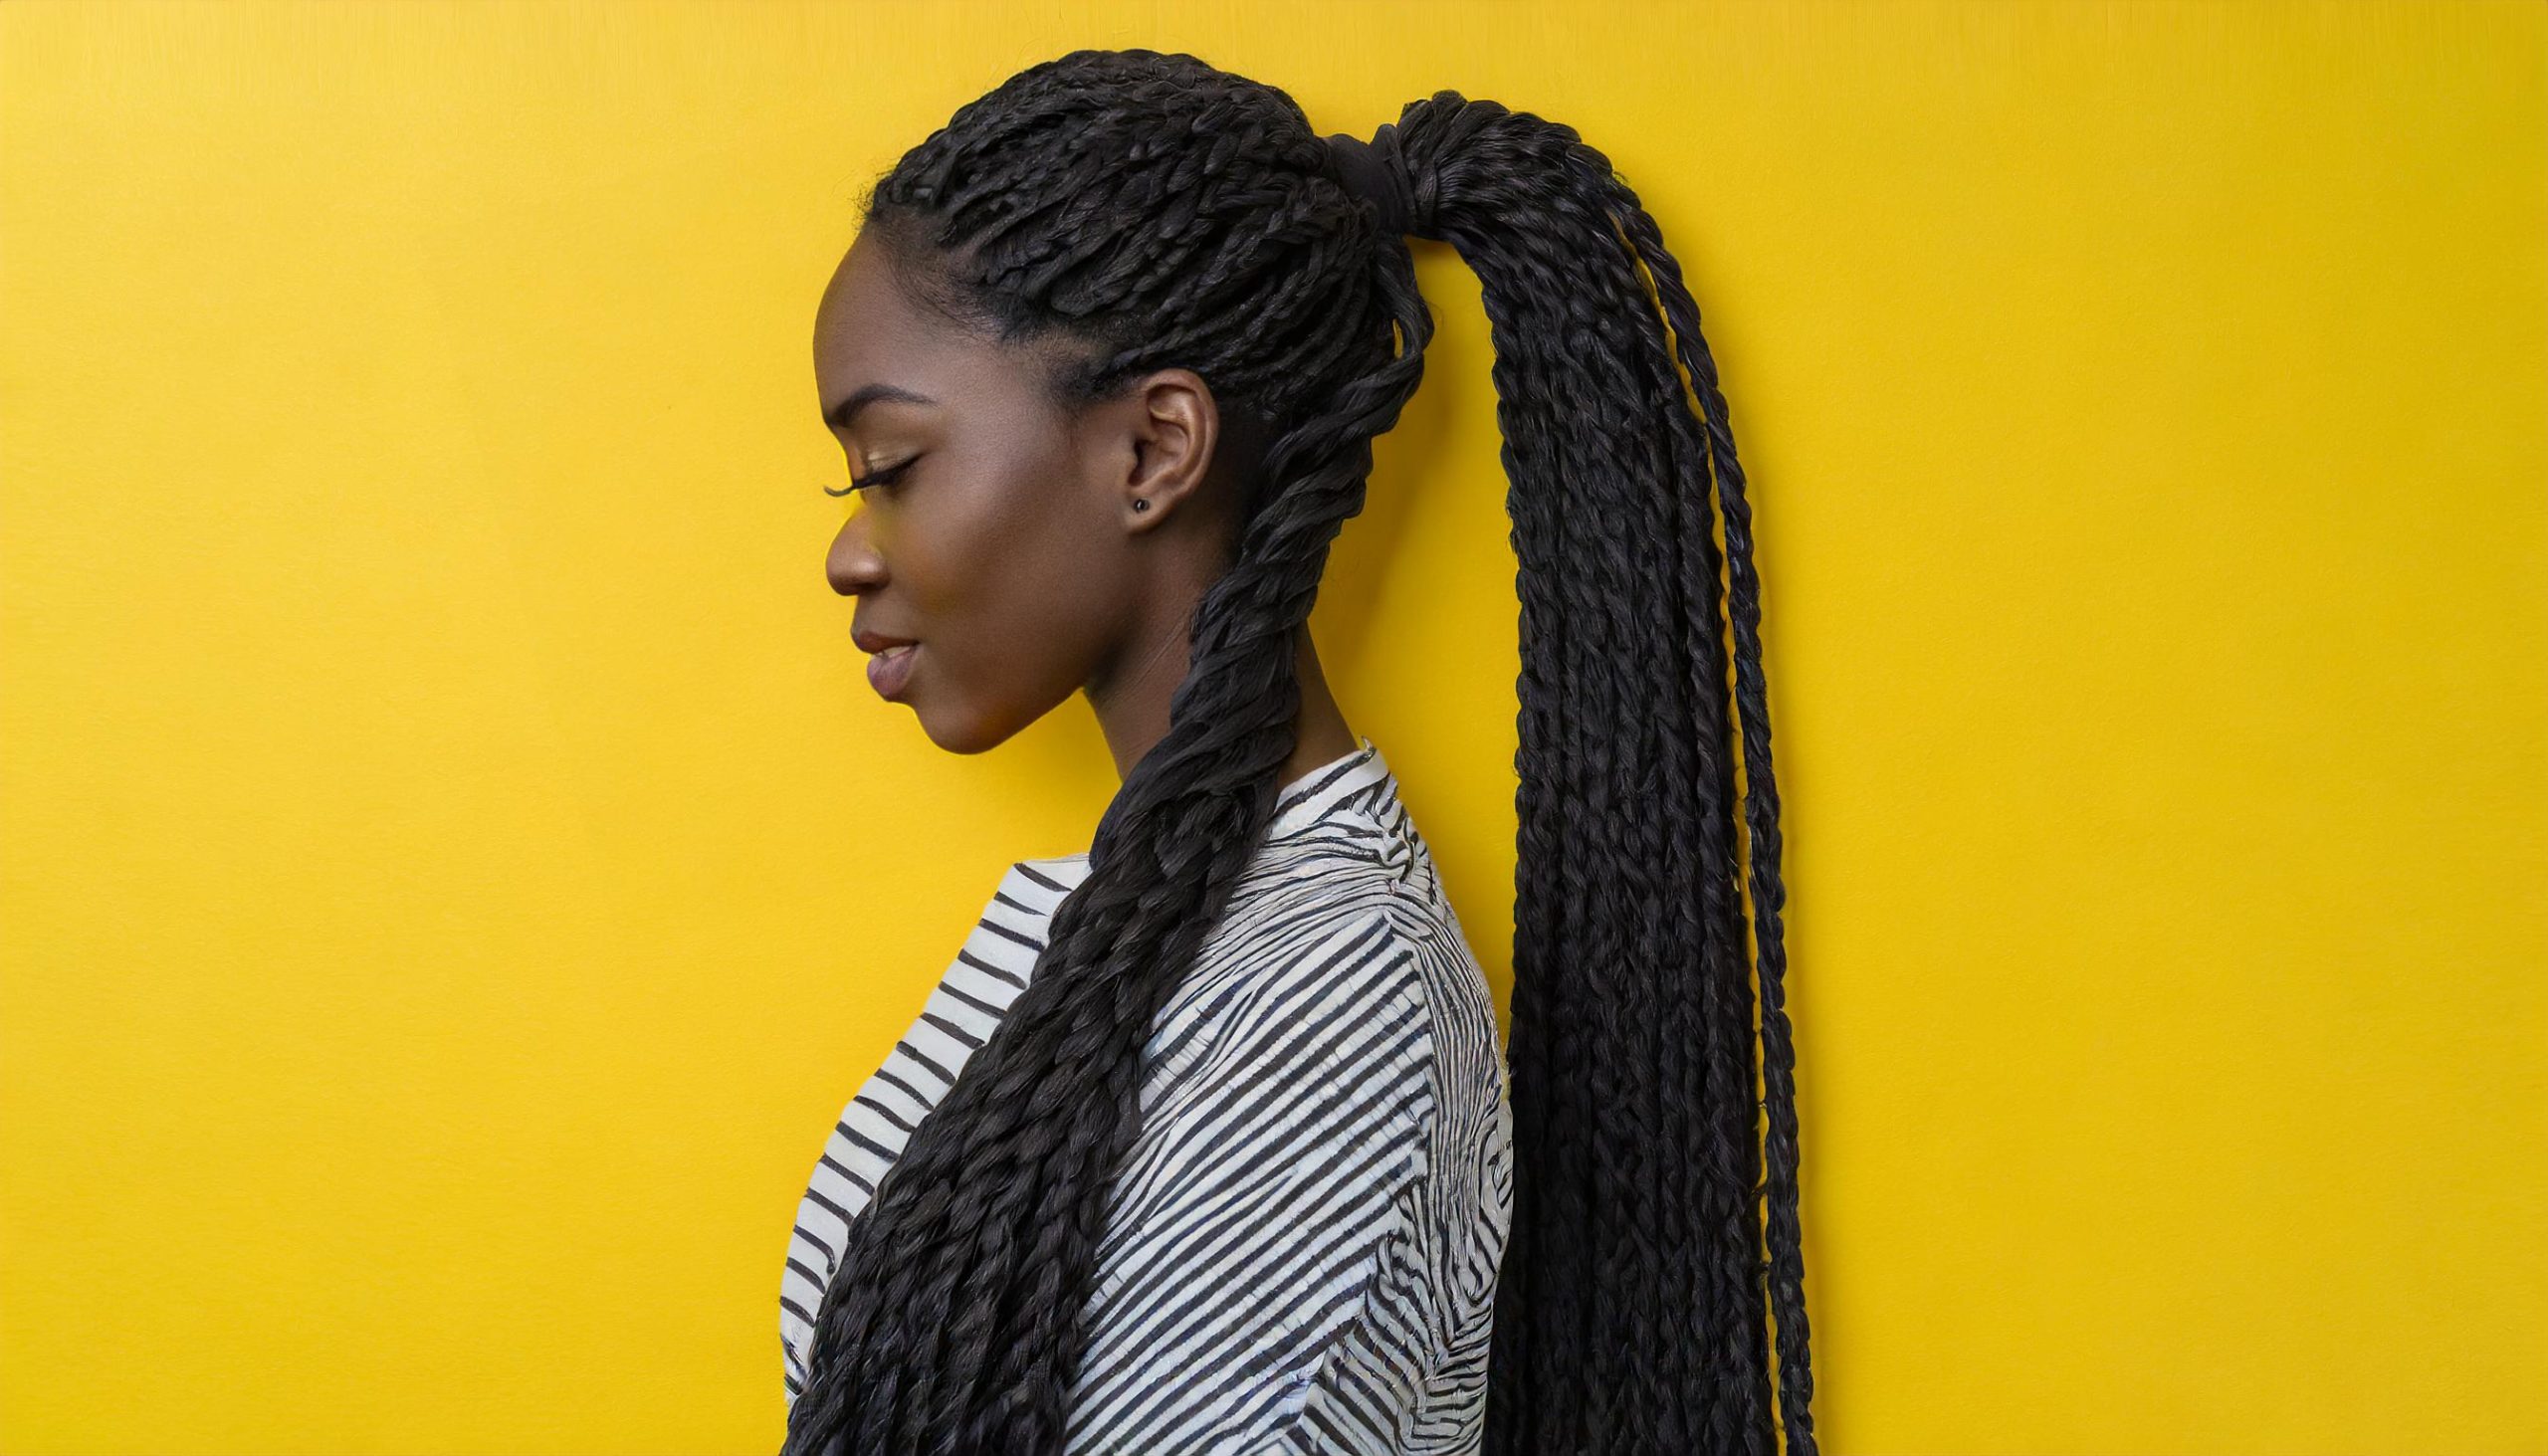 Firefly Black women with long thin braids on a yellow background 47559 scaled - Born Sexy Yesterday: How "Poor Things" is subverting stereotypes?